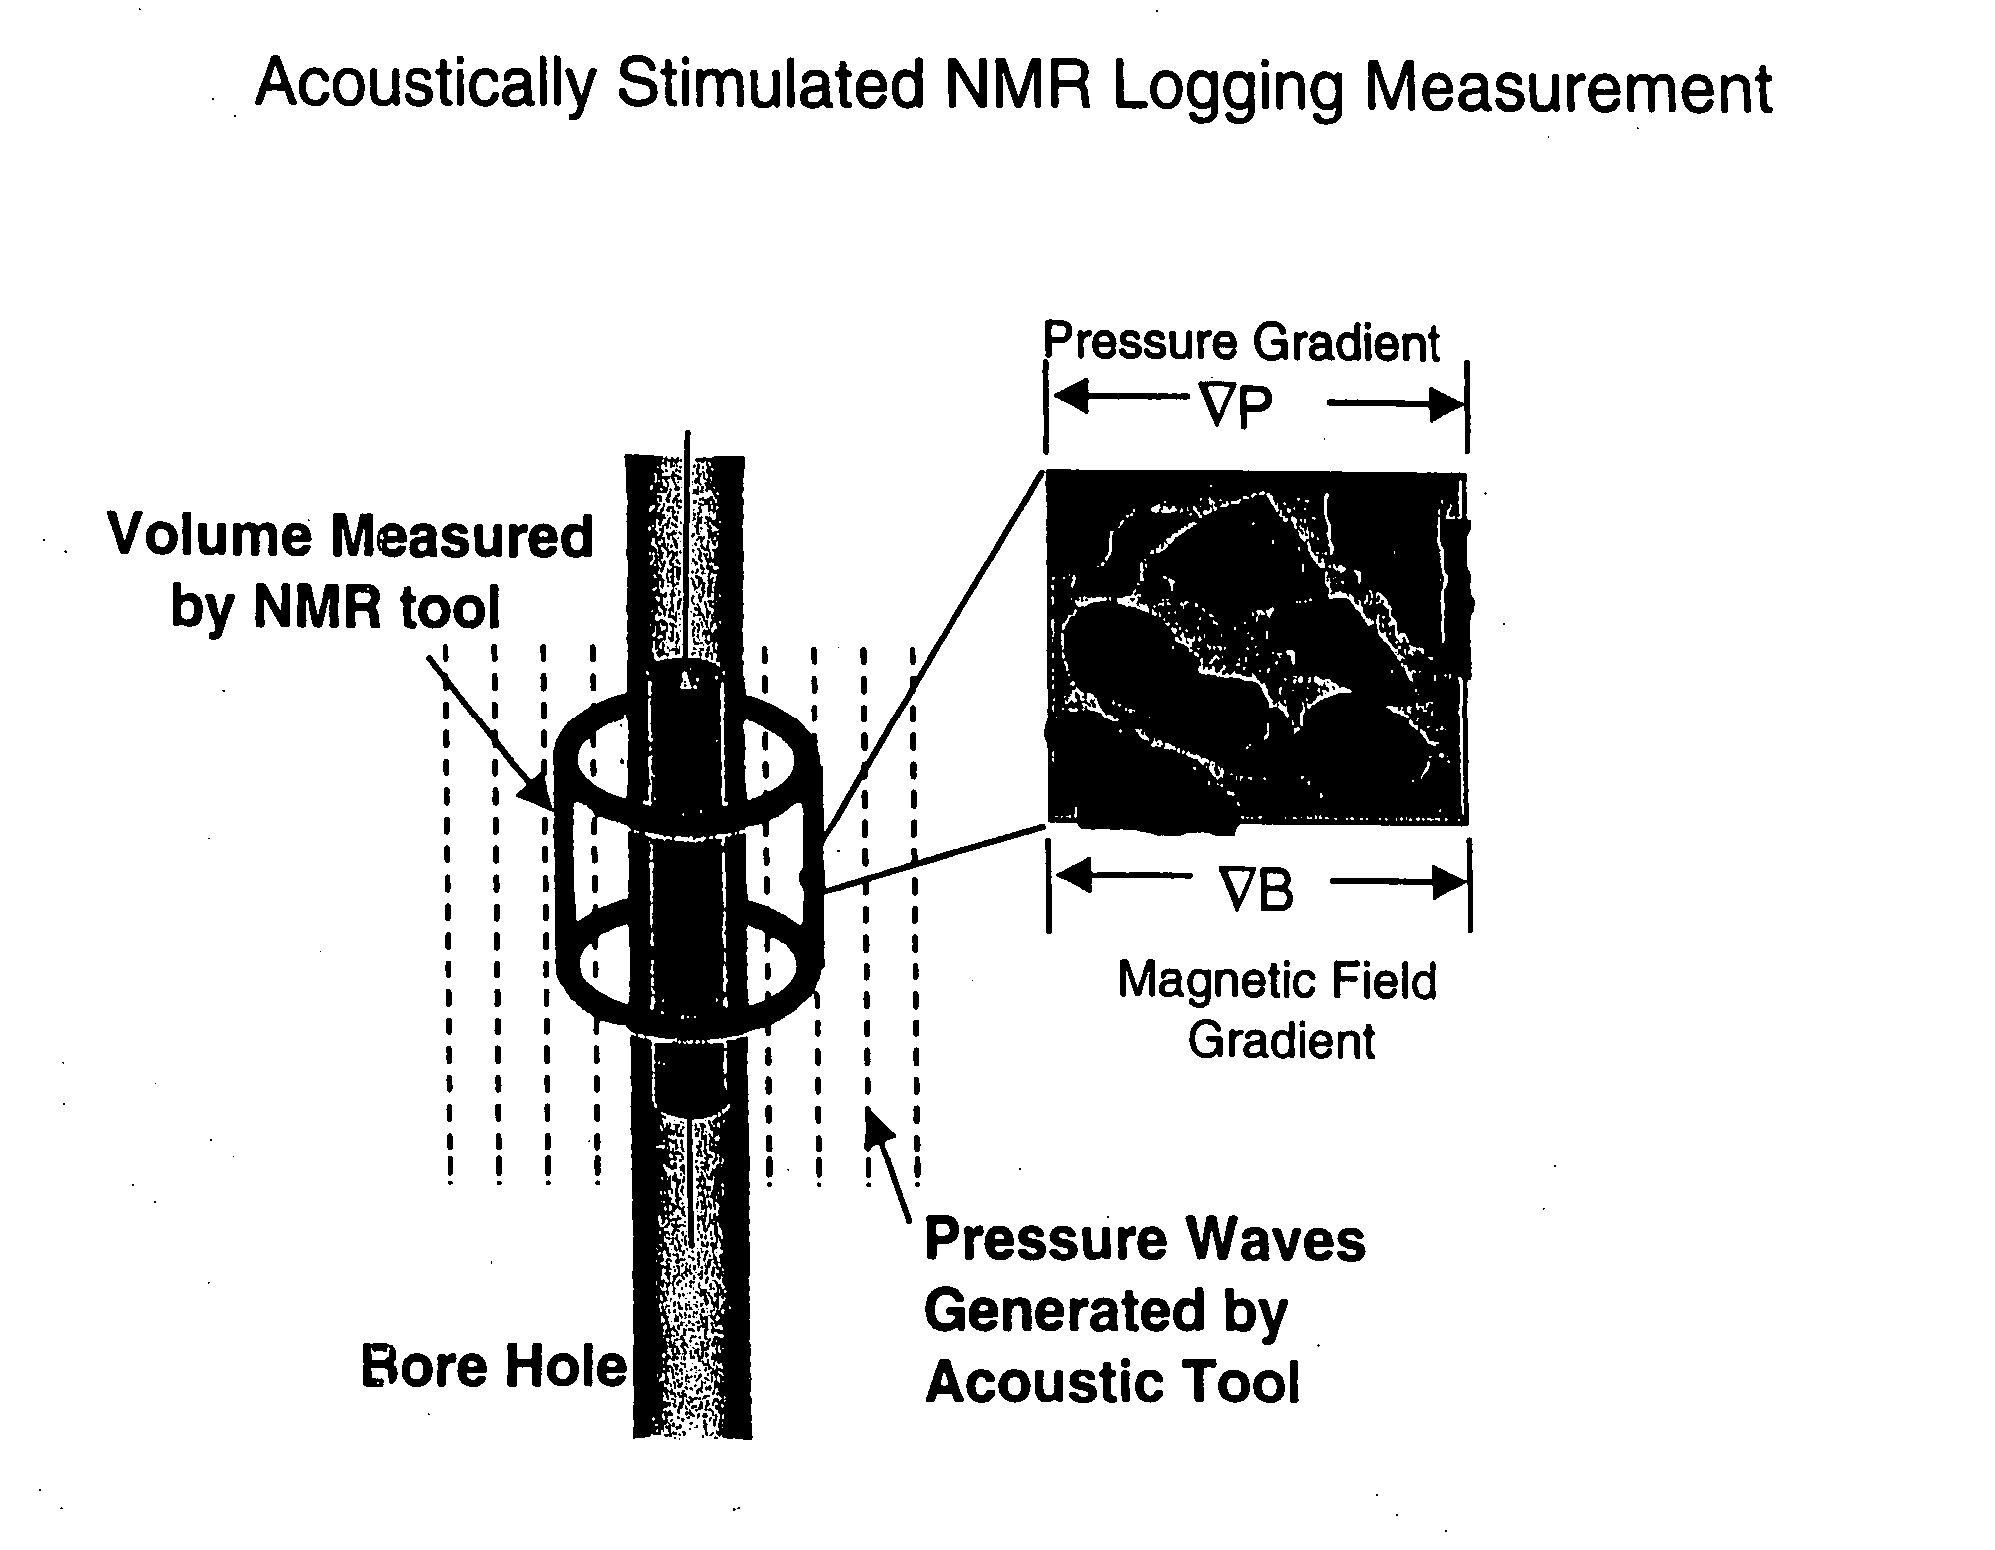 Fluid flow properties from acoustically stimulated NMR